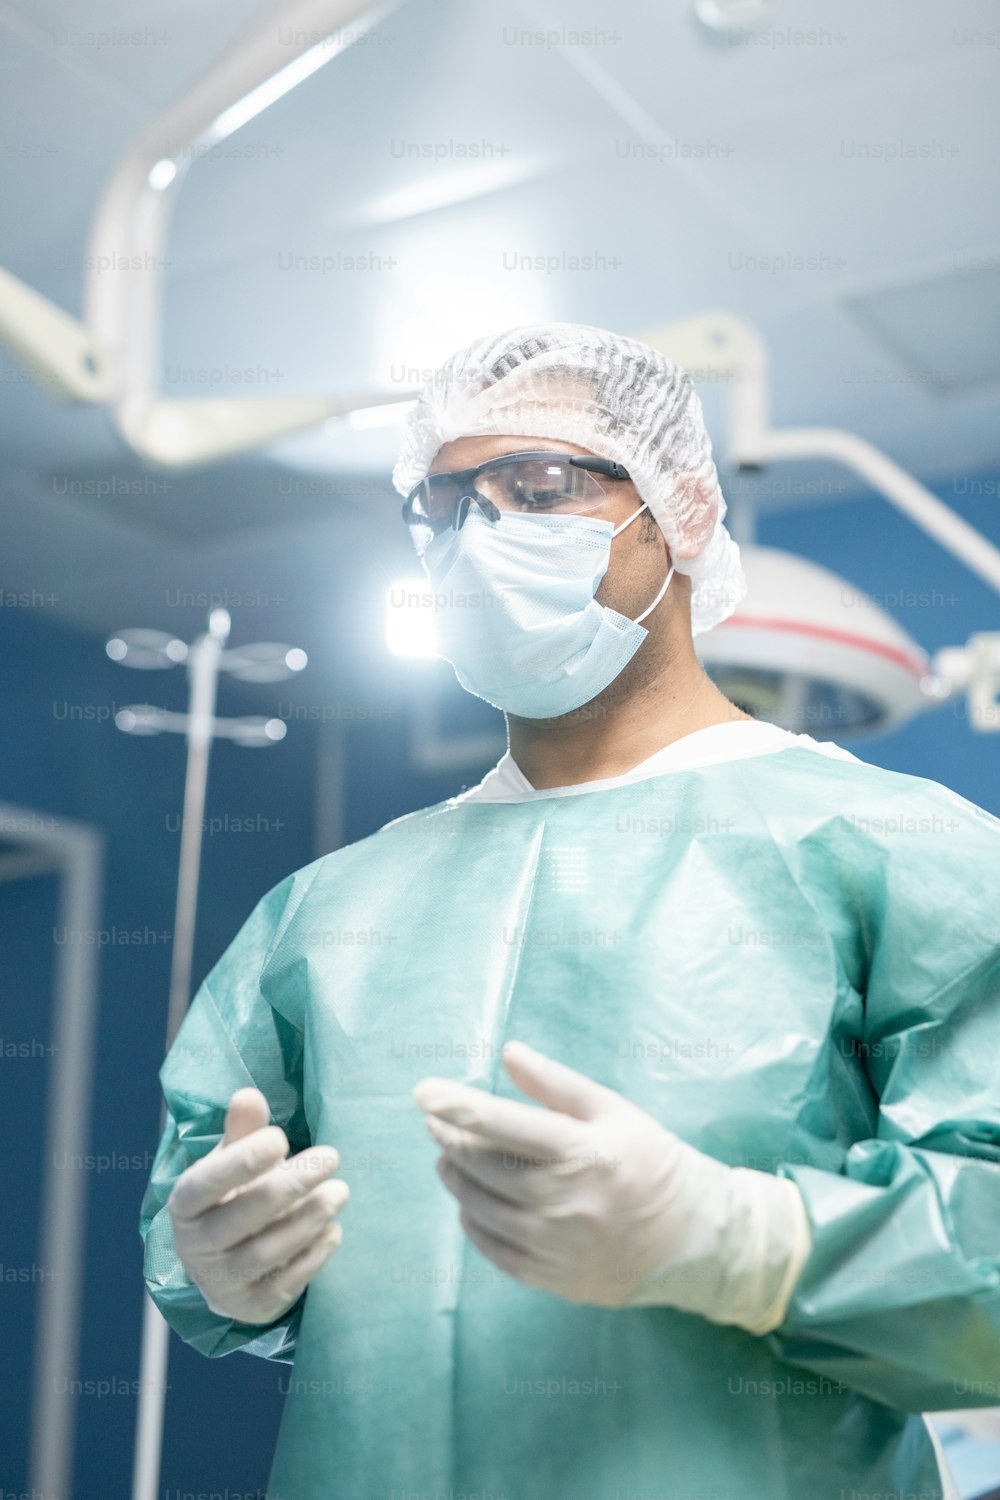 Professional male surgeon in protective workwear, mask, gloves and eyeglasses standing in operating room and going to operate patient